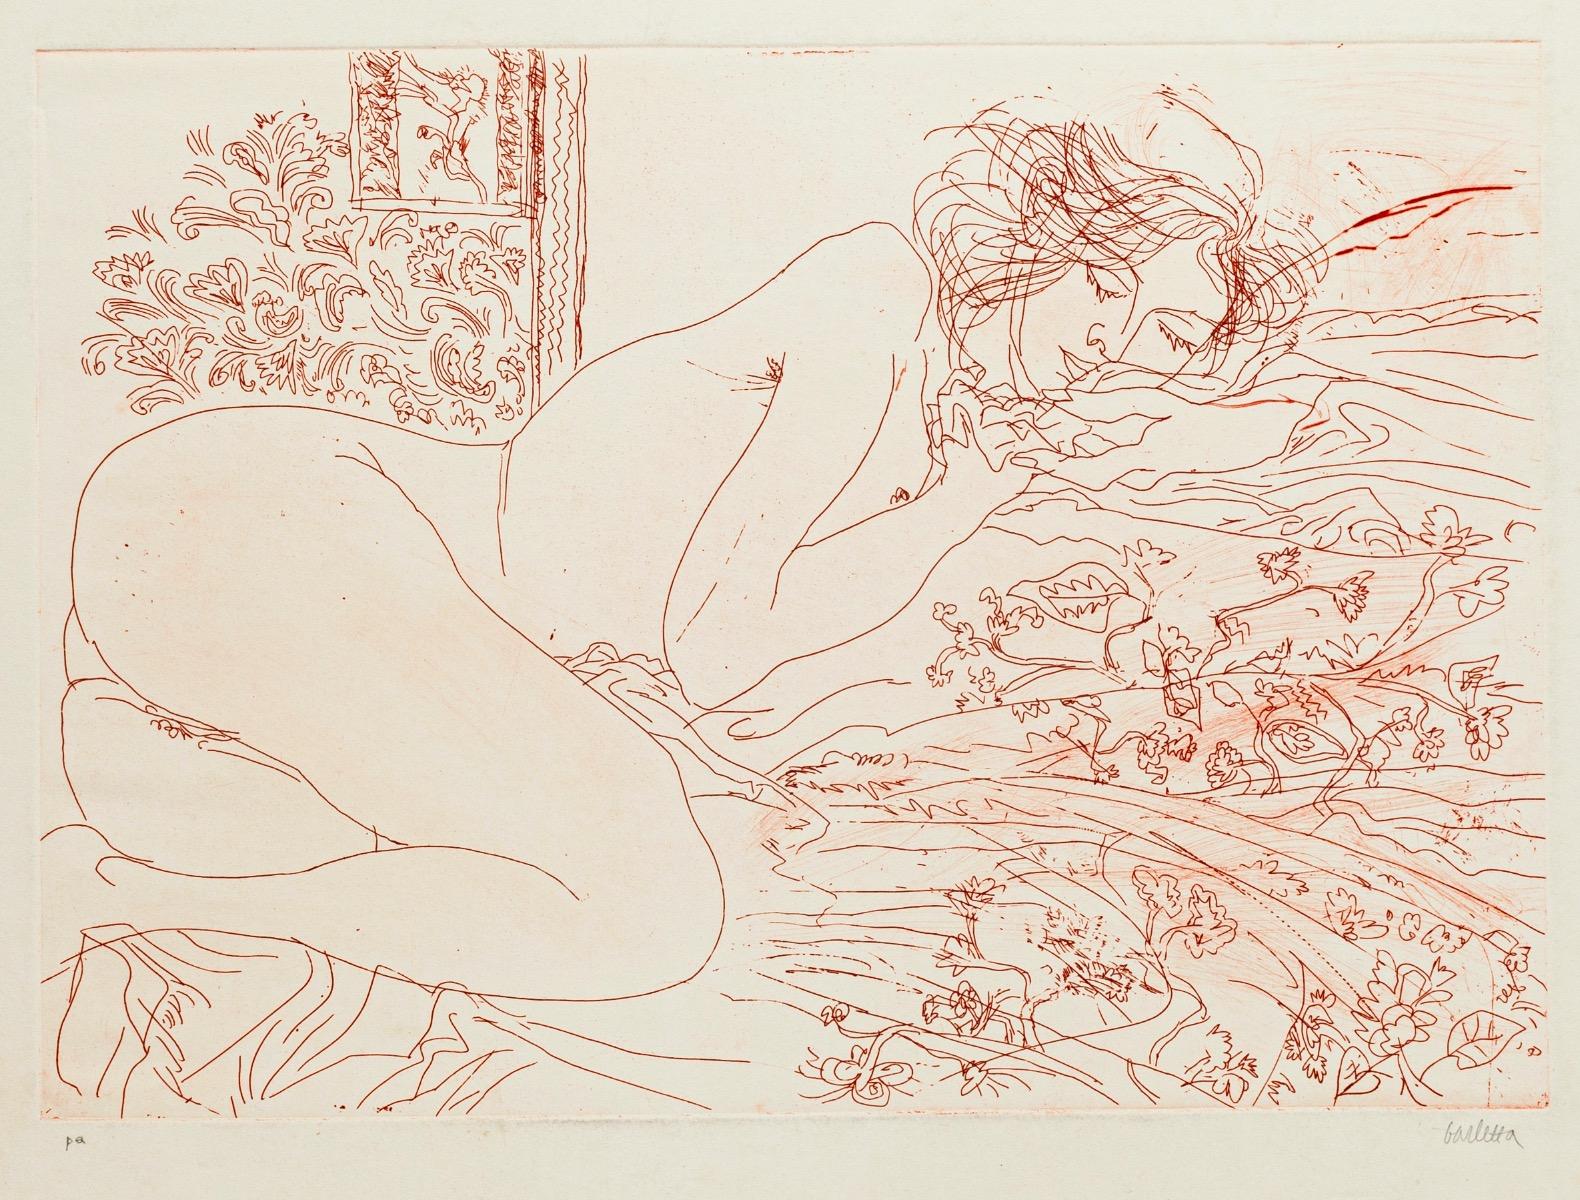 Nude is an original etching artwork, realized by Sergio Barletta, hand-signed on the lower right in pencil.

In very good conditions, except for a small piece of missing paper on the right margins, this defect does not affect the image. 

The